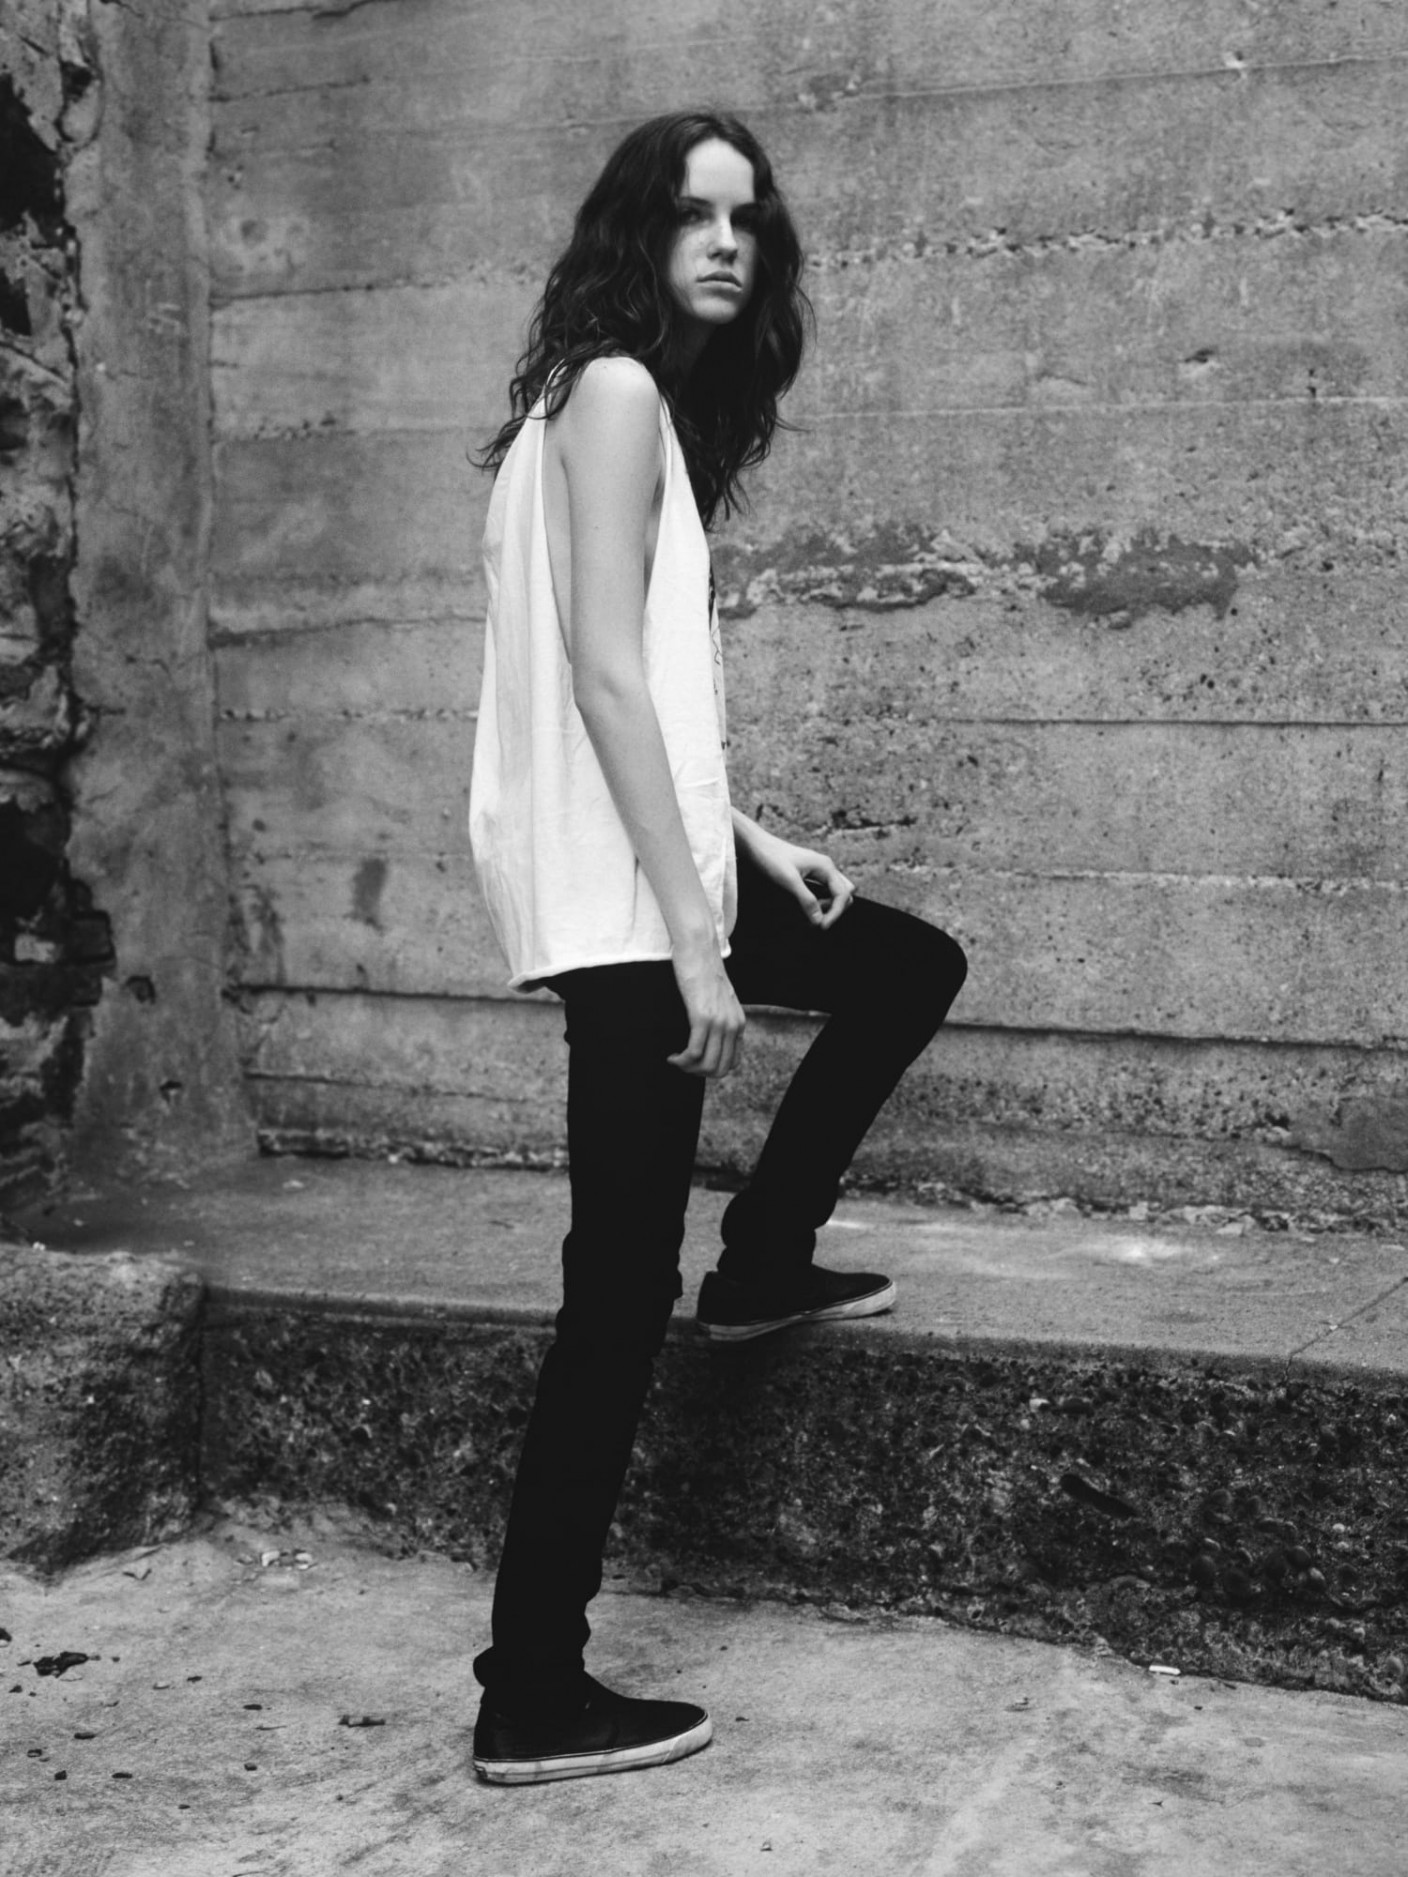 A model wearing a white cut off shirt and black jeans. One leg is raised up on a concrete ledge.